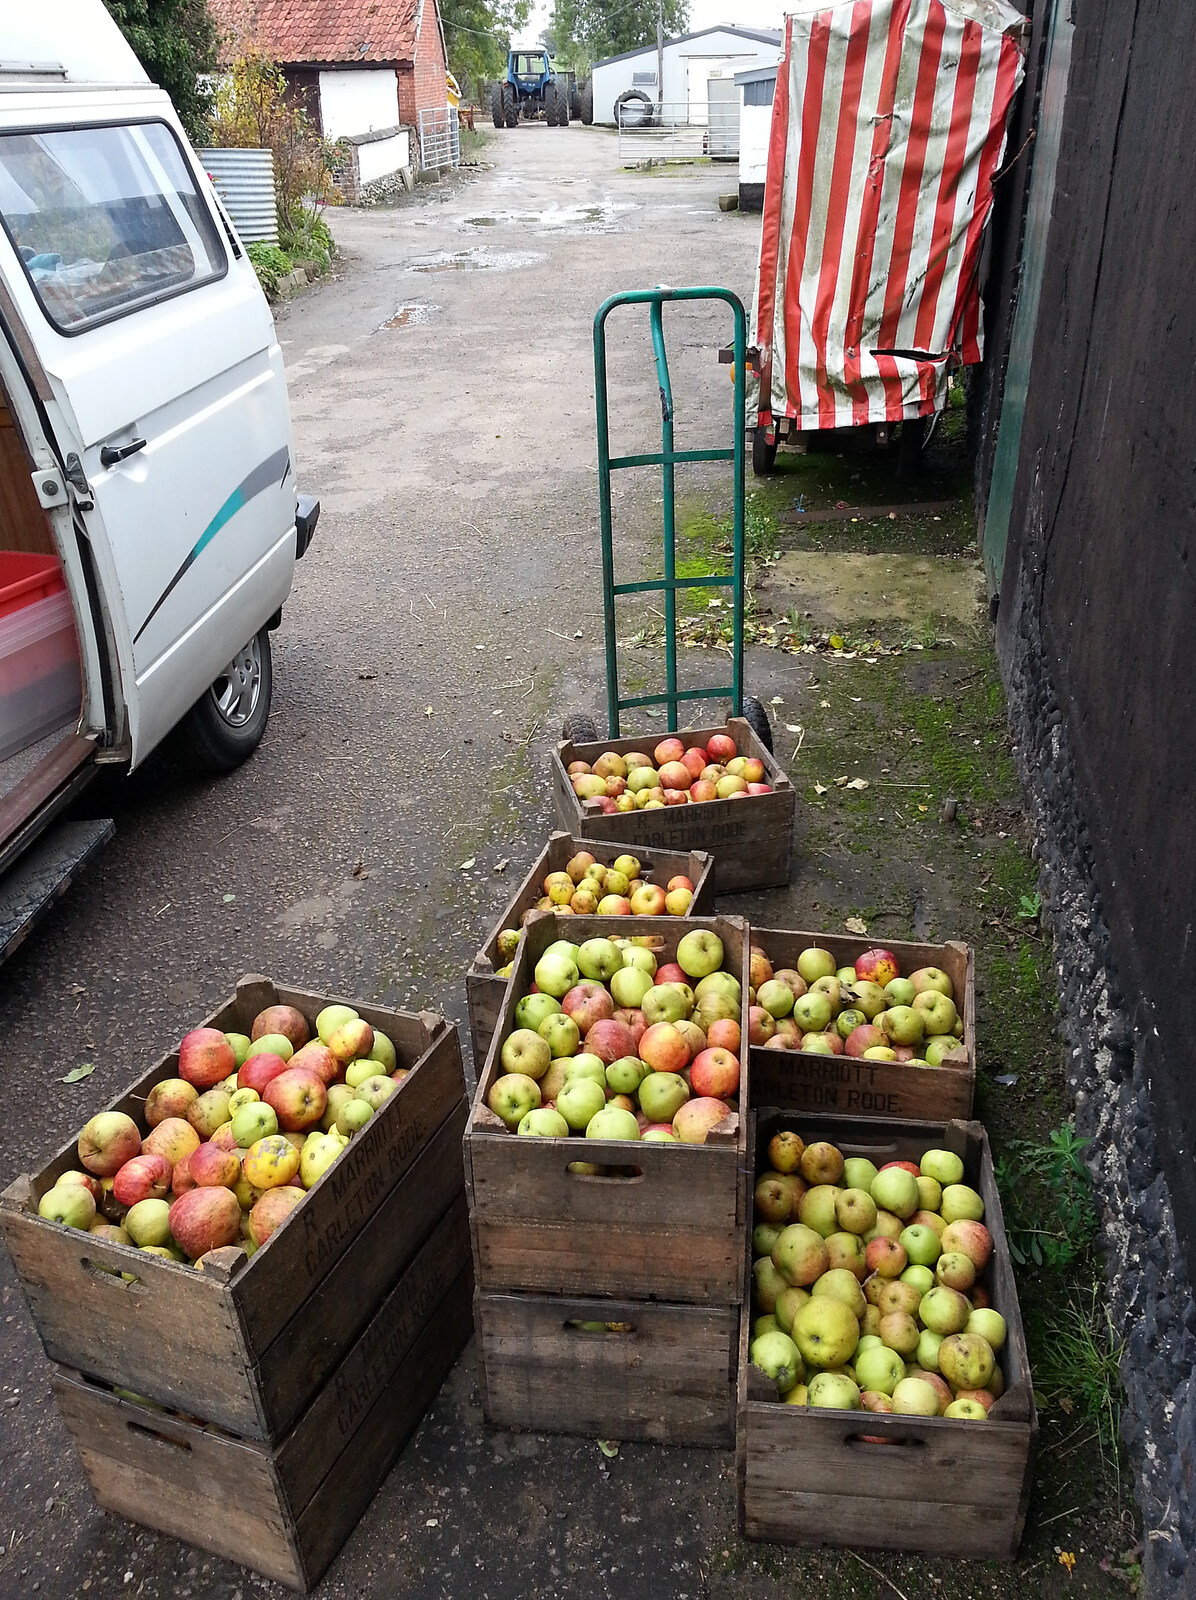 The apple harvest is dropped off at Trevor's place from Cameraphone Randomness and a Thornham Walk, Suffolk - 14th December 2014